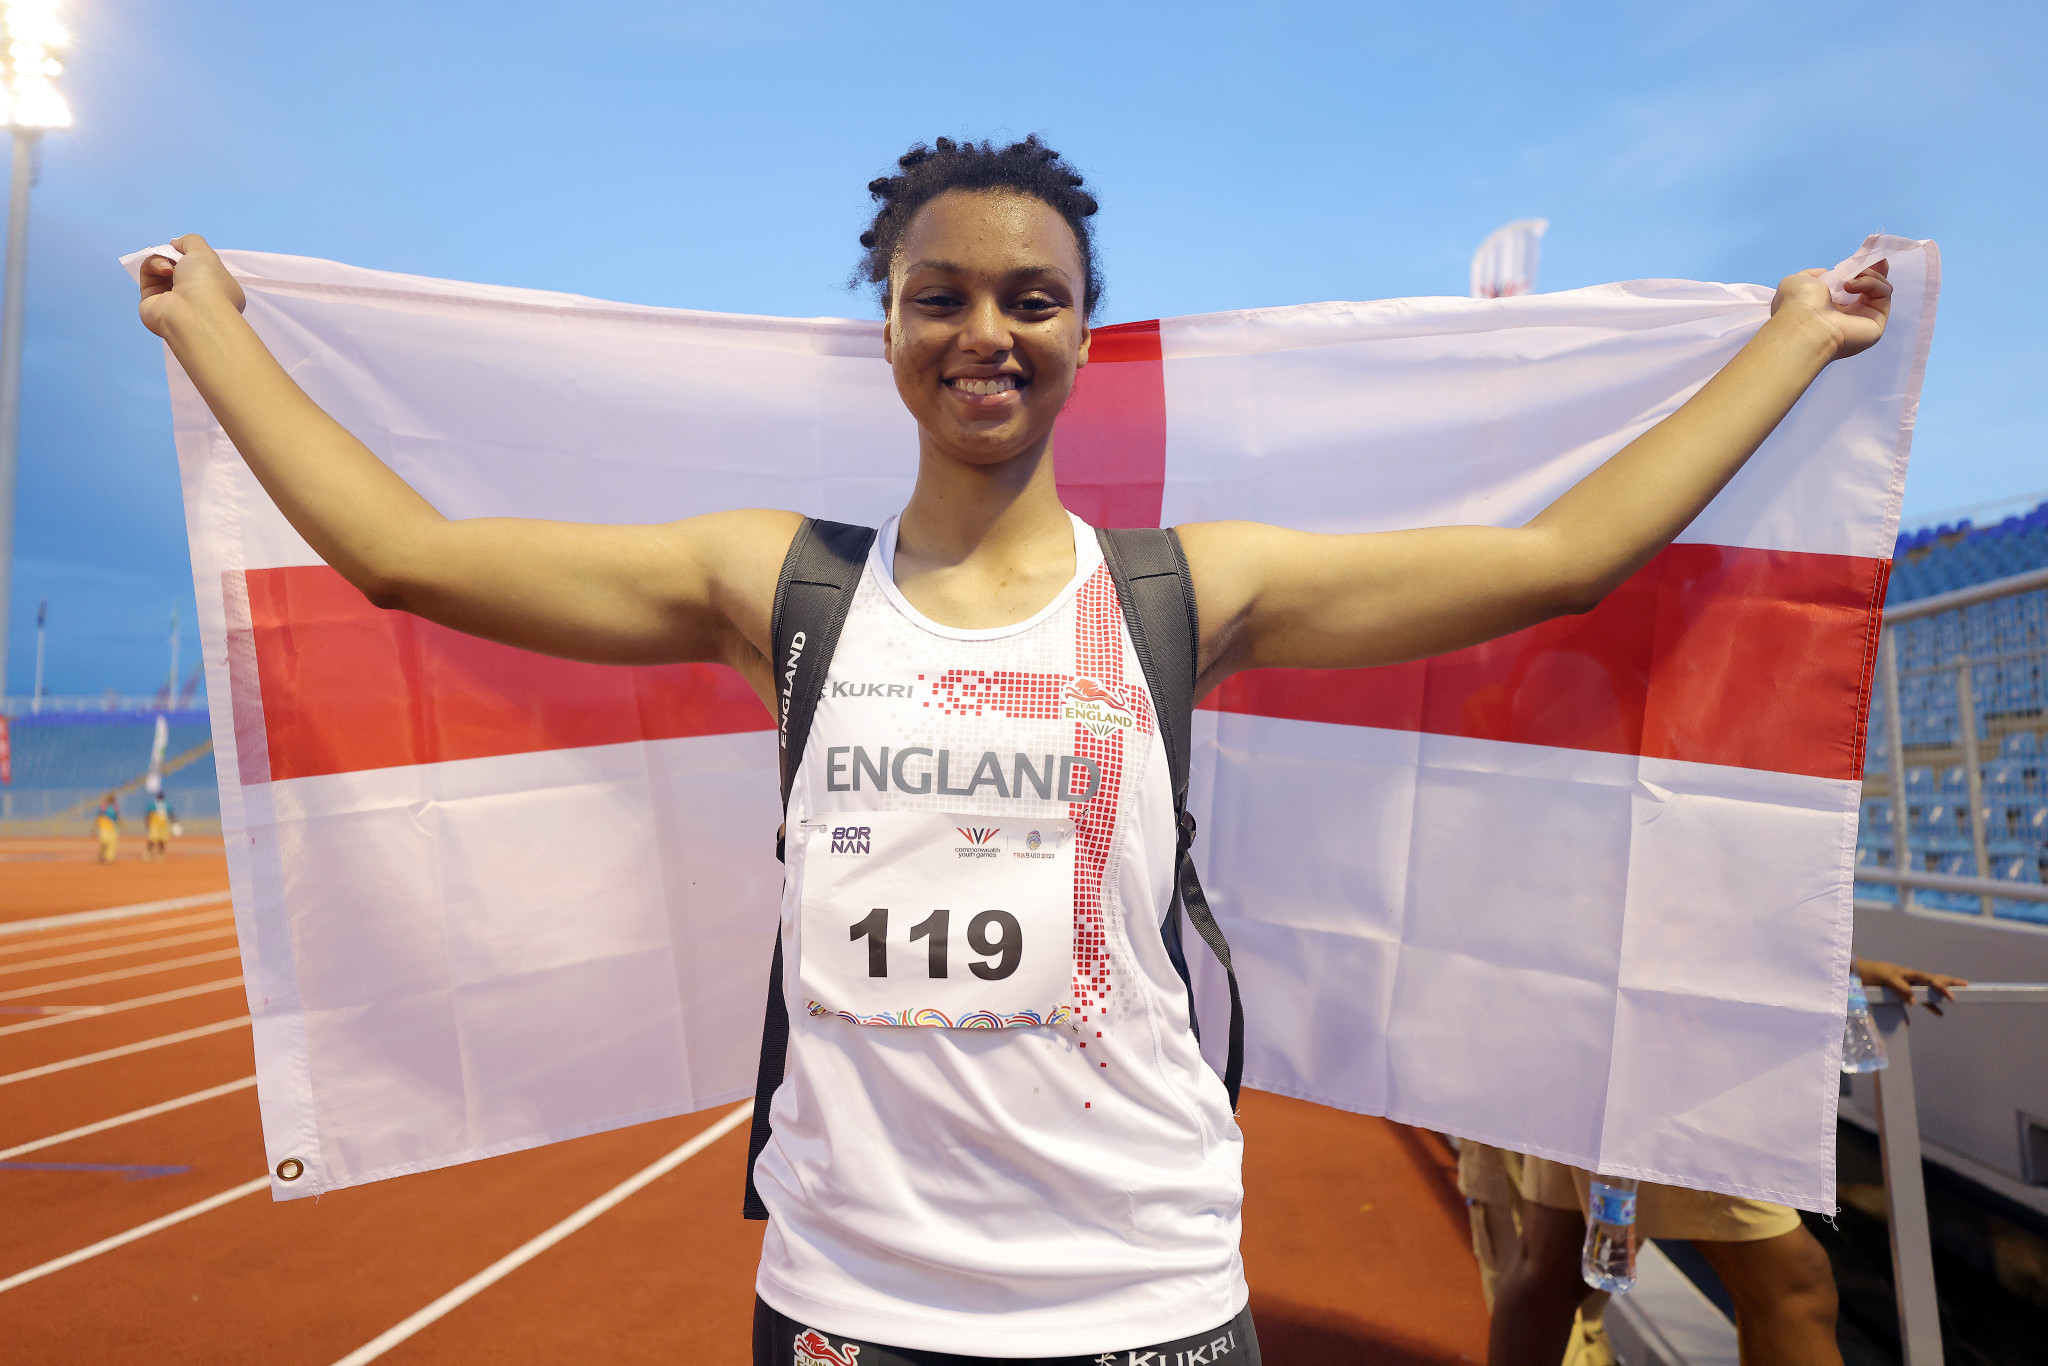  Ayesha Jones set a Commonwealth Youth Games record in the women's javelin to win one of four golds for England ©Getty Images